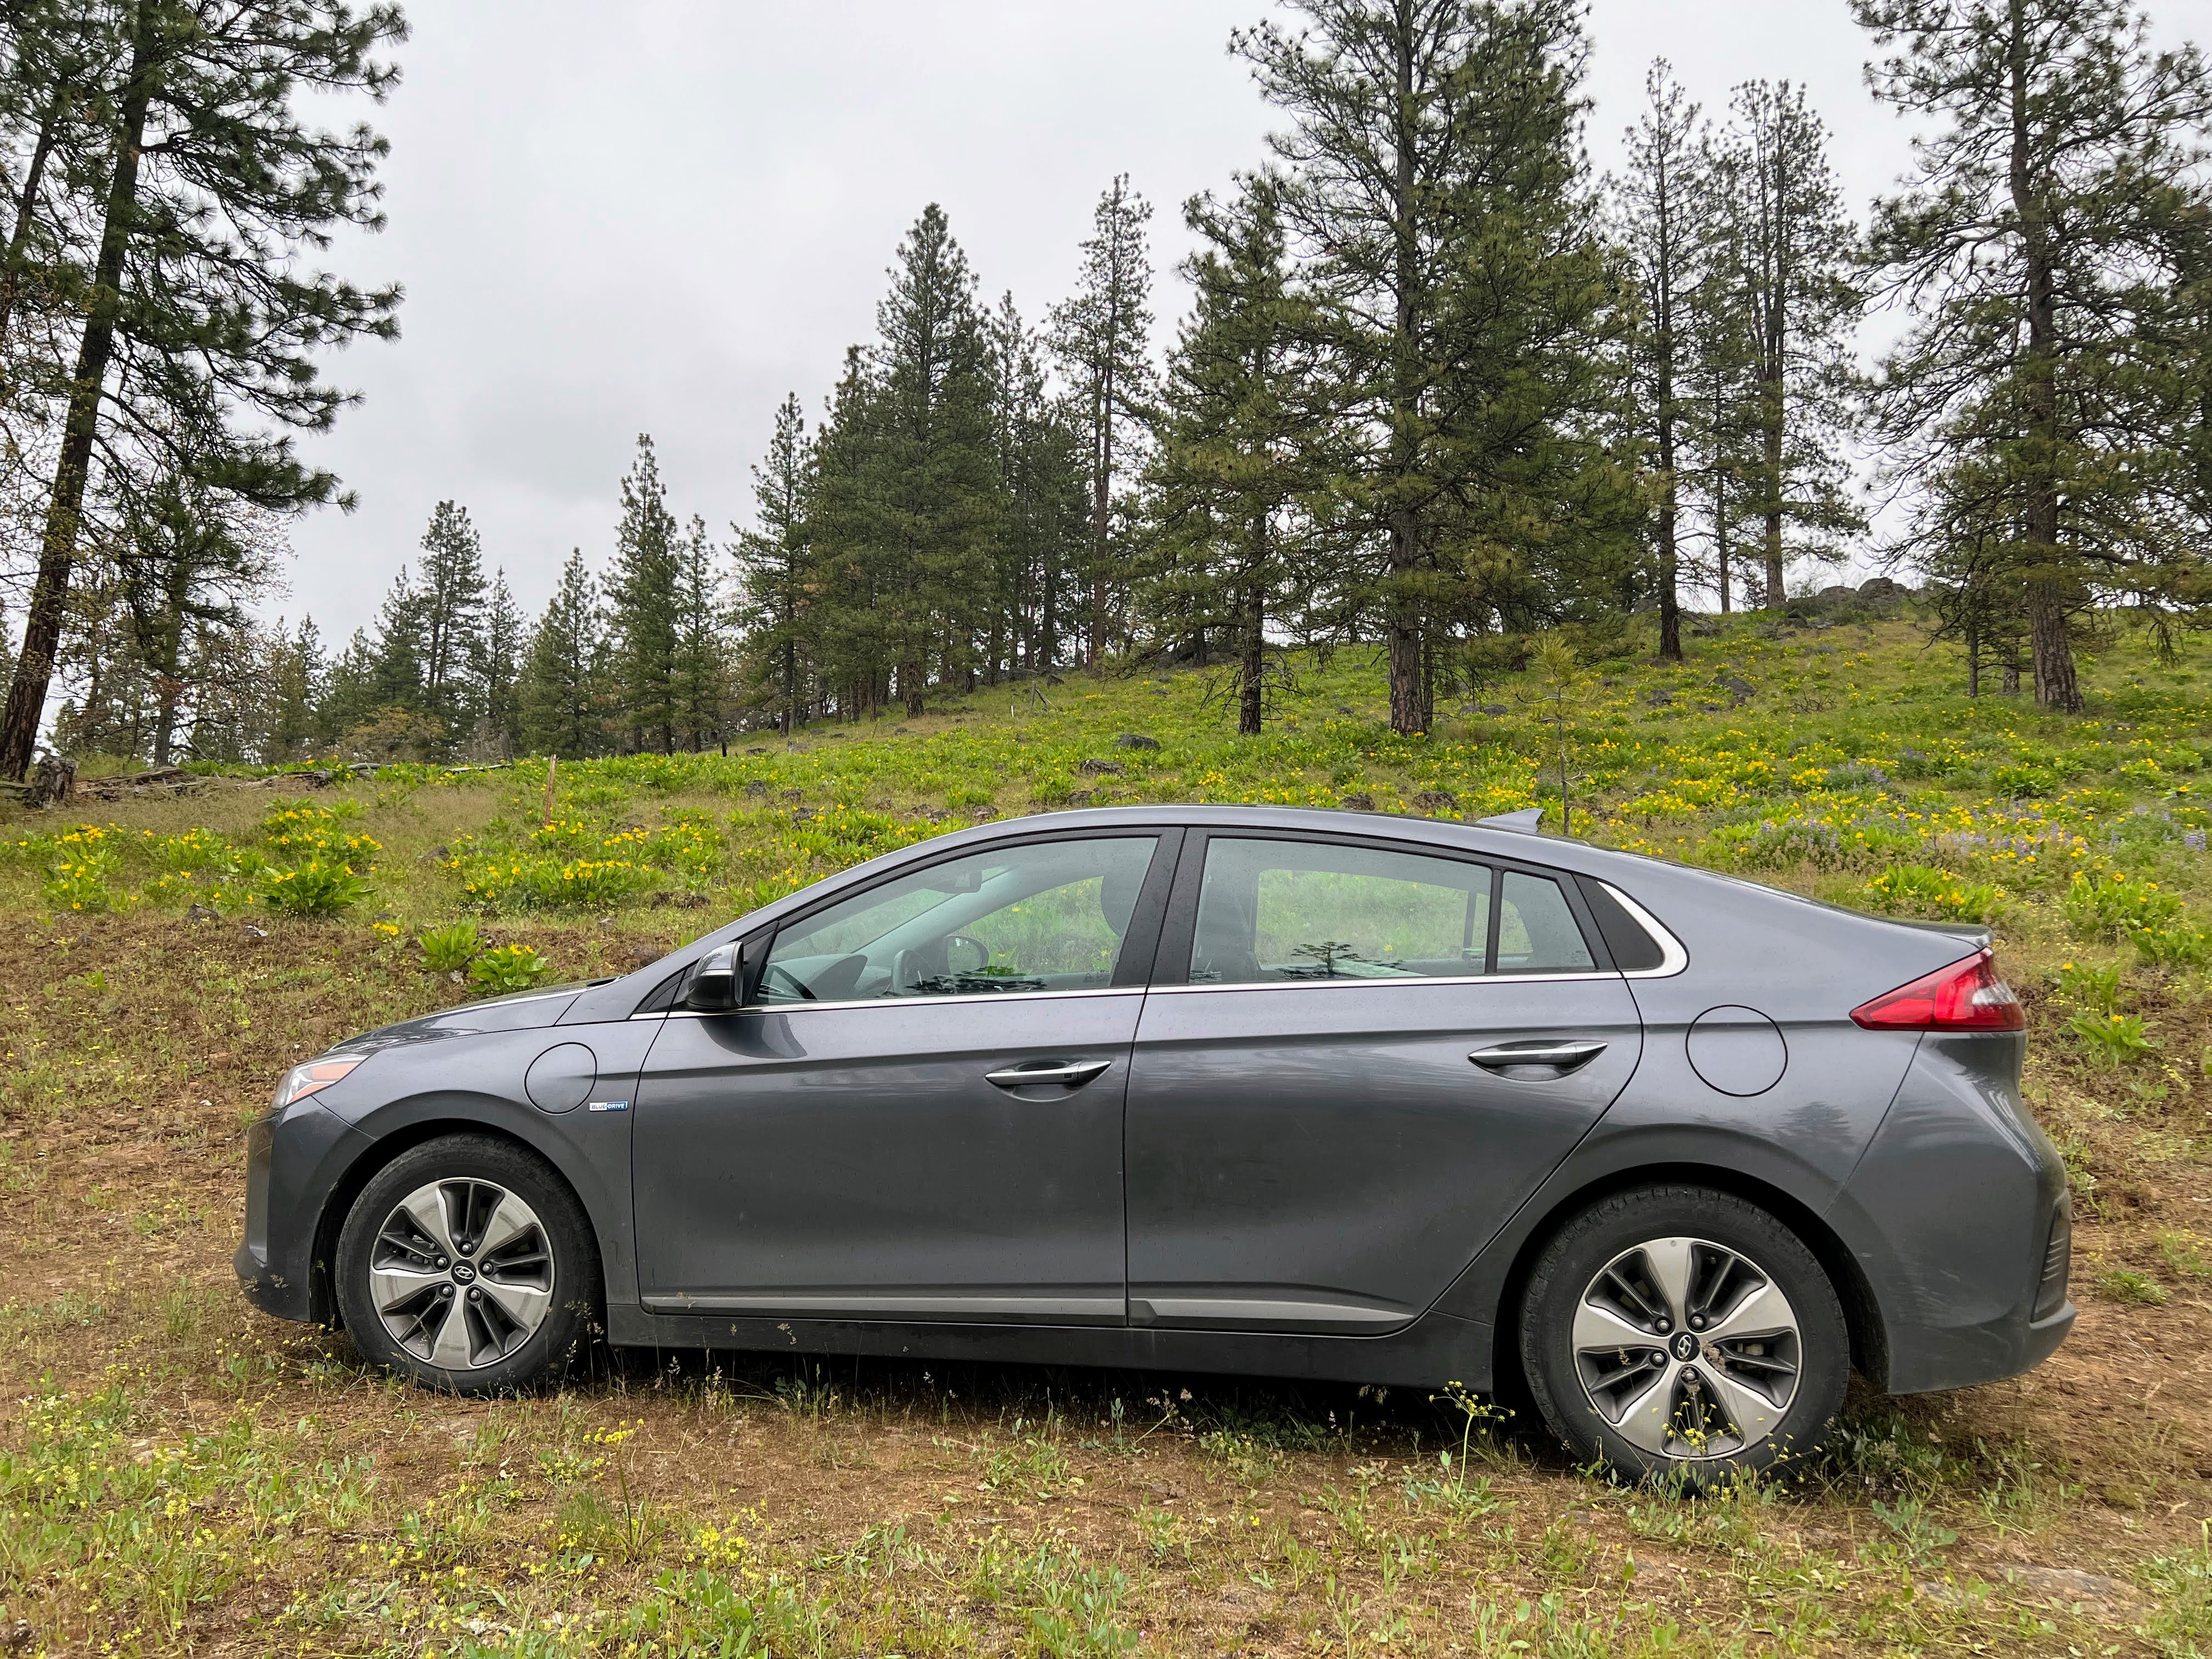 The author's 2019 Hyundai Ioniq sits in a grass field, where it has failed to start.